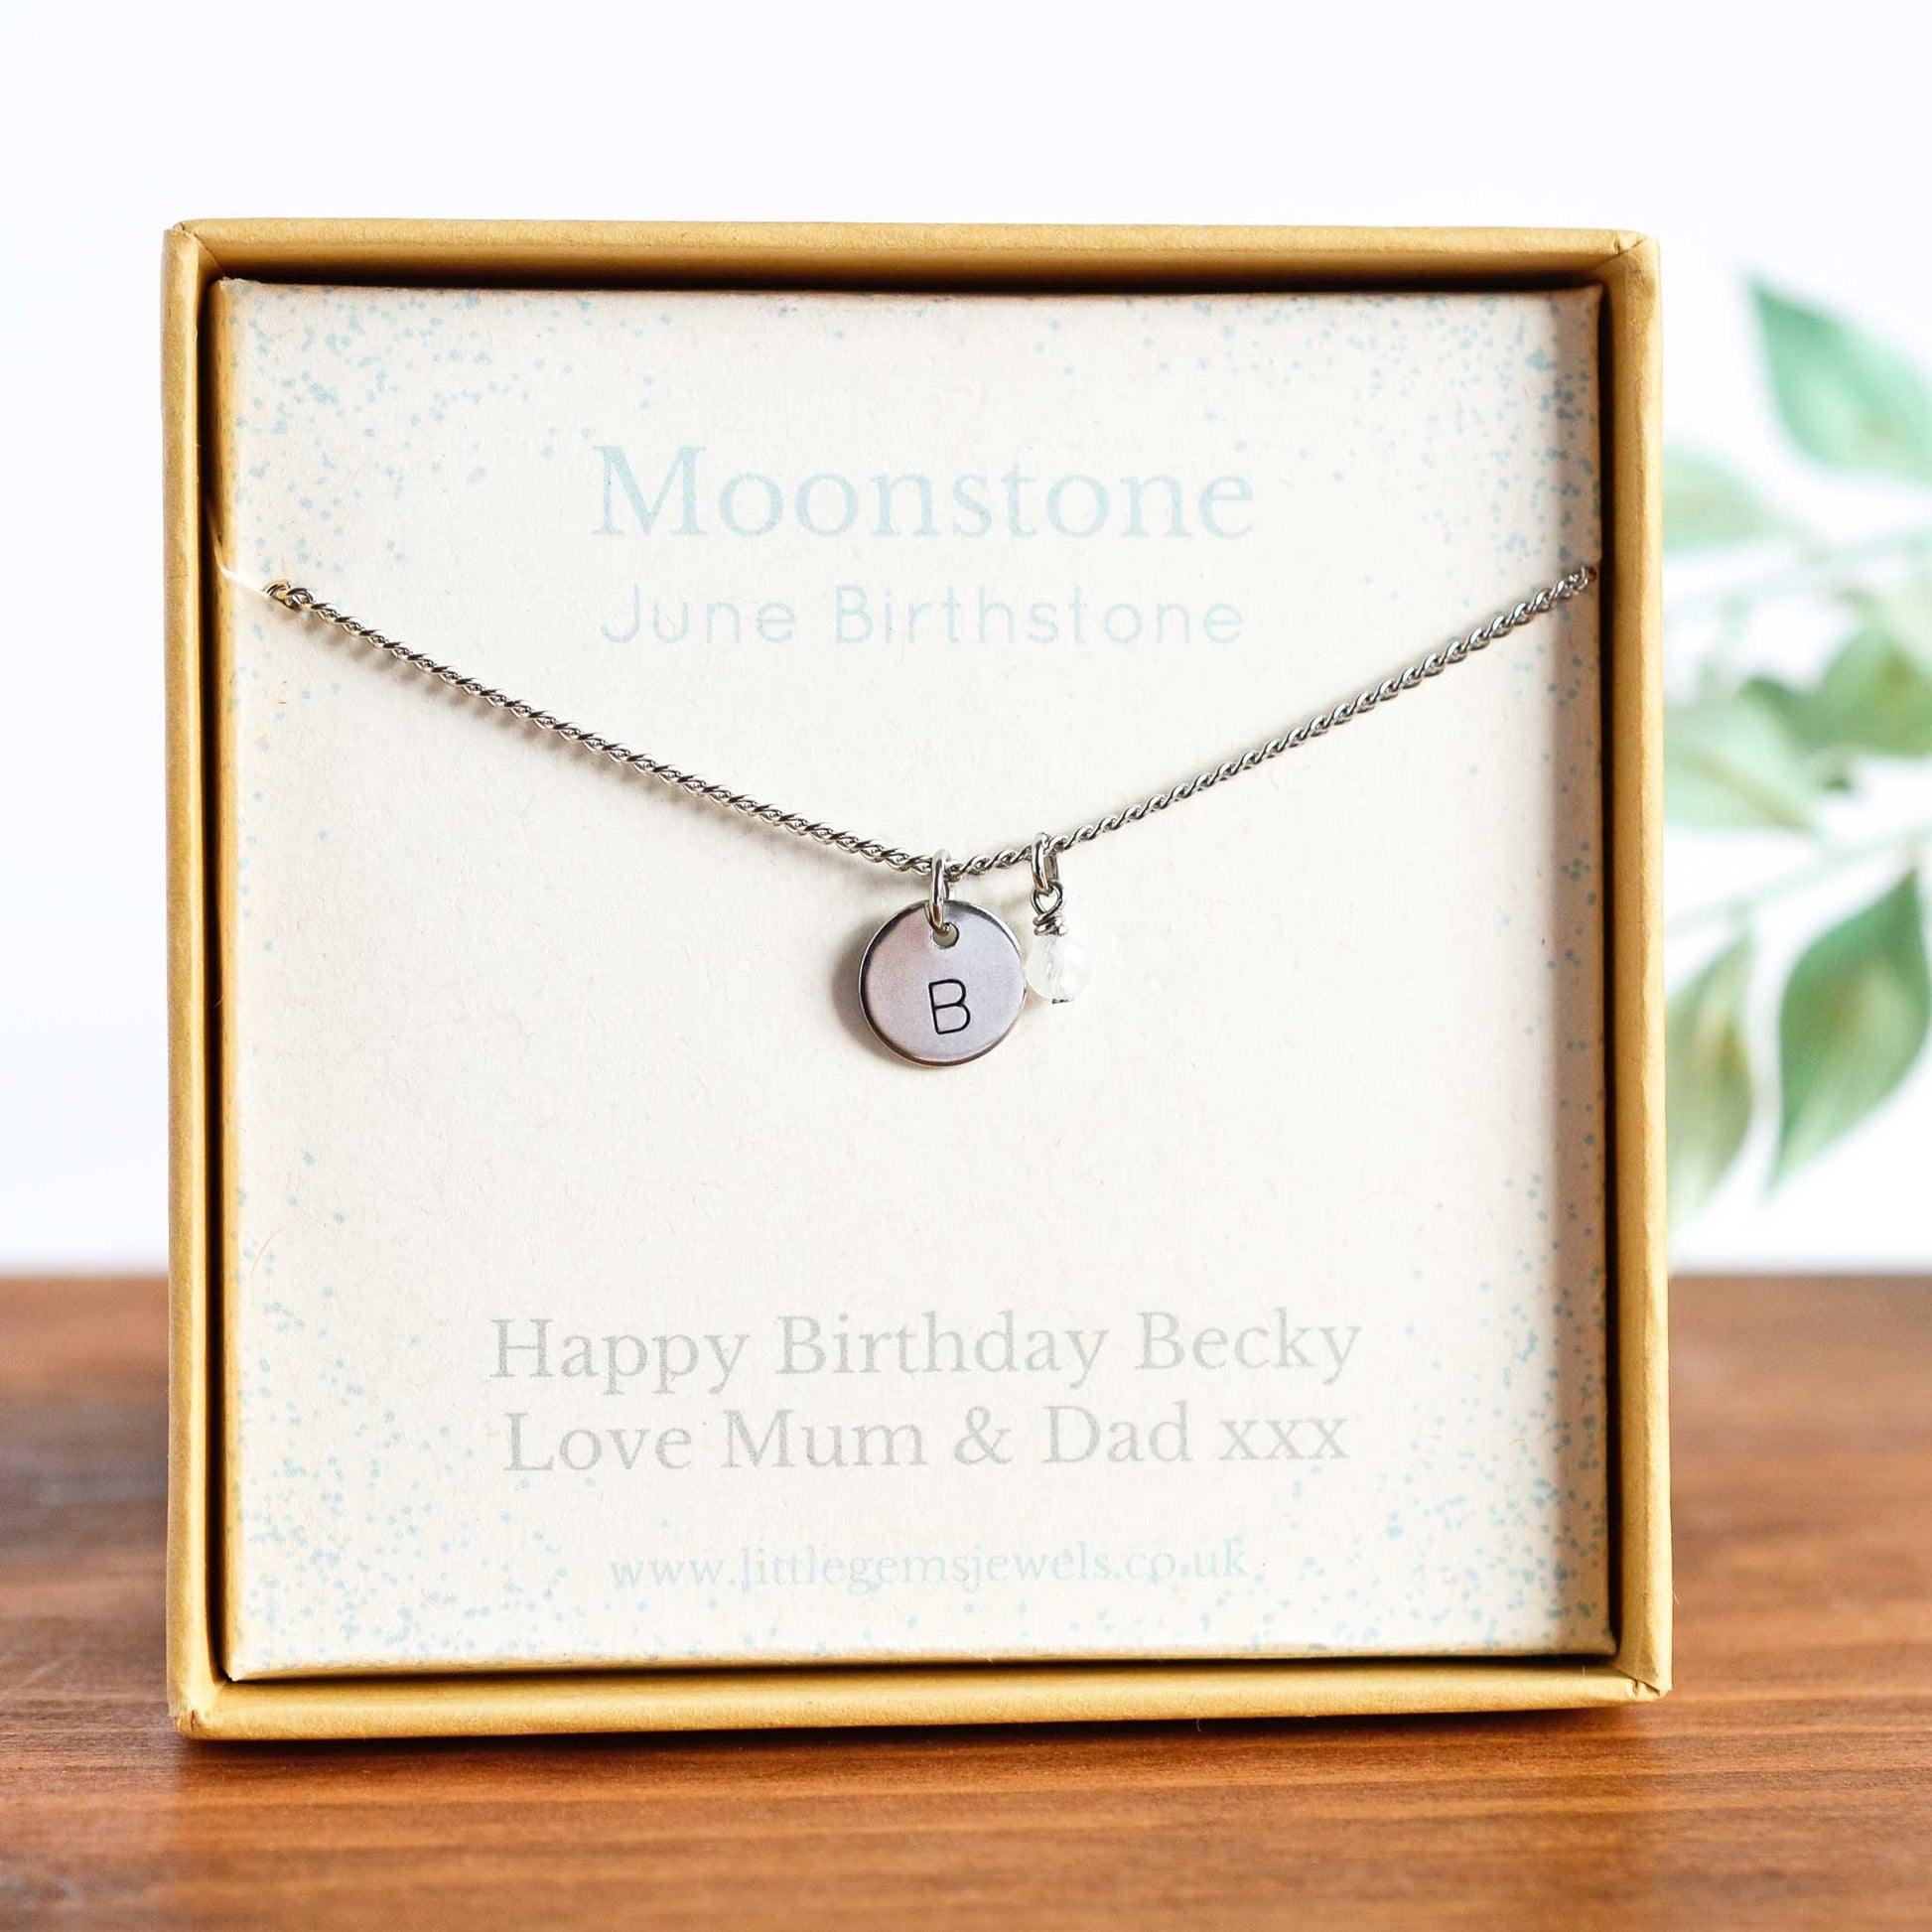 June Birthstone necklace with initial charm & personalised gift message in eco friendly gift box